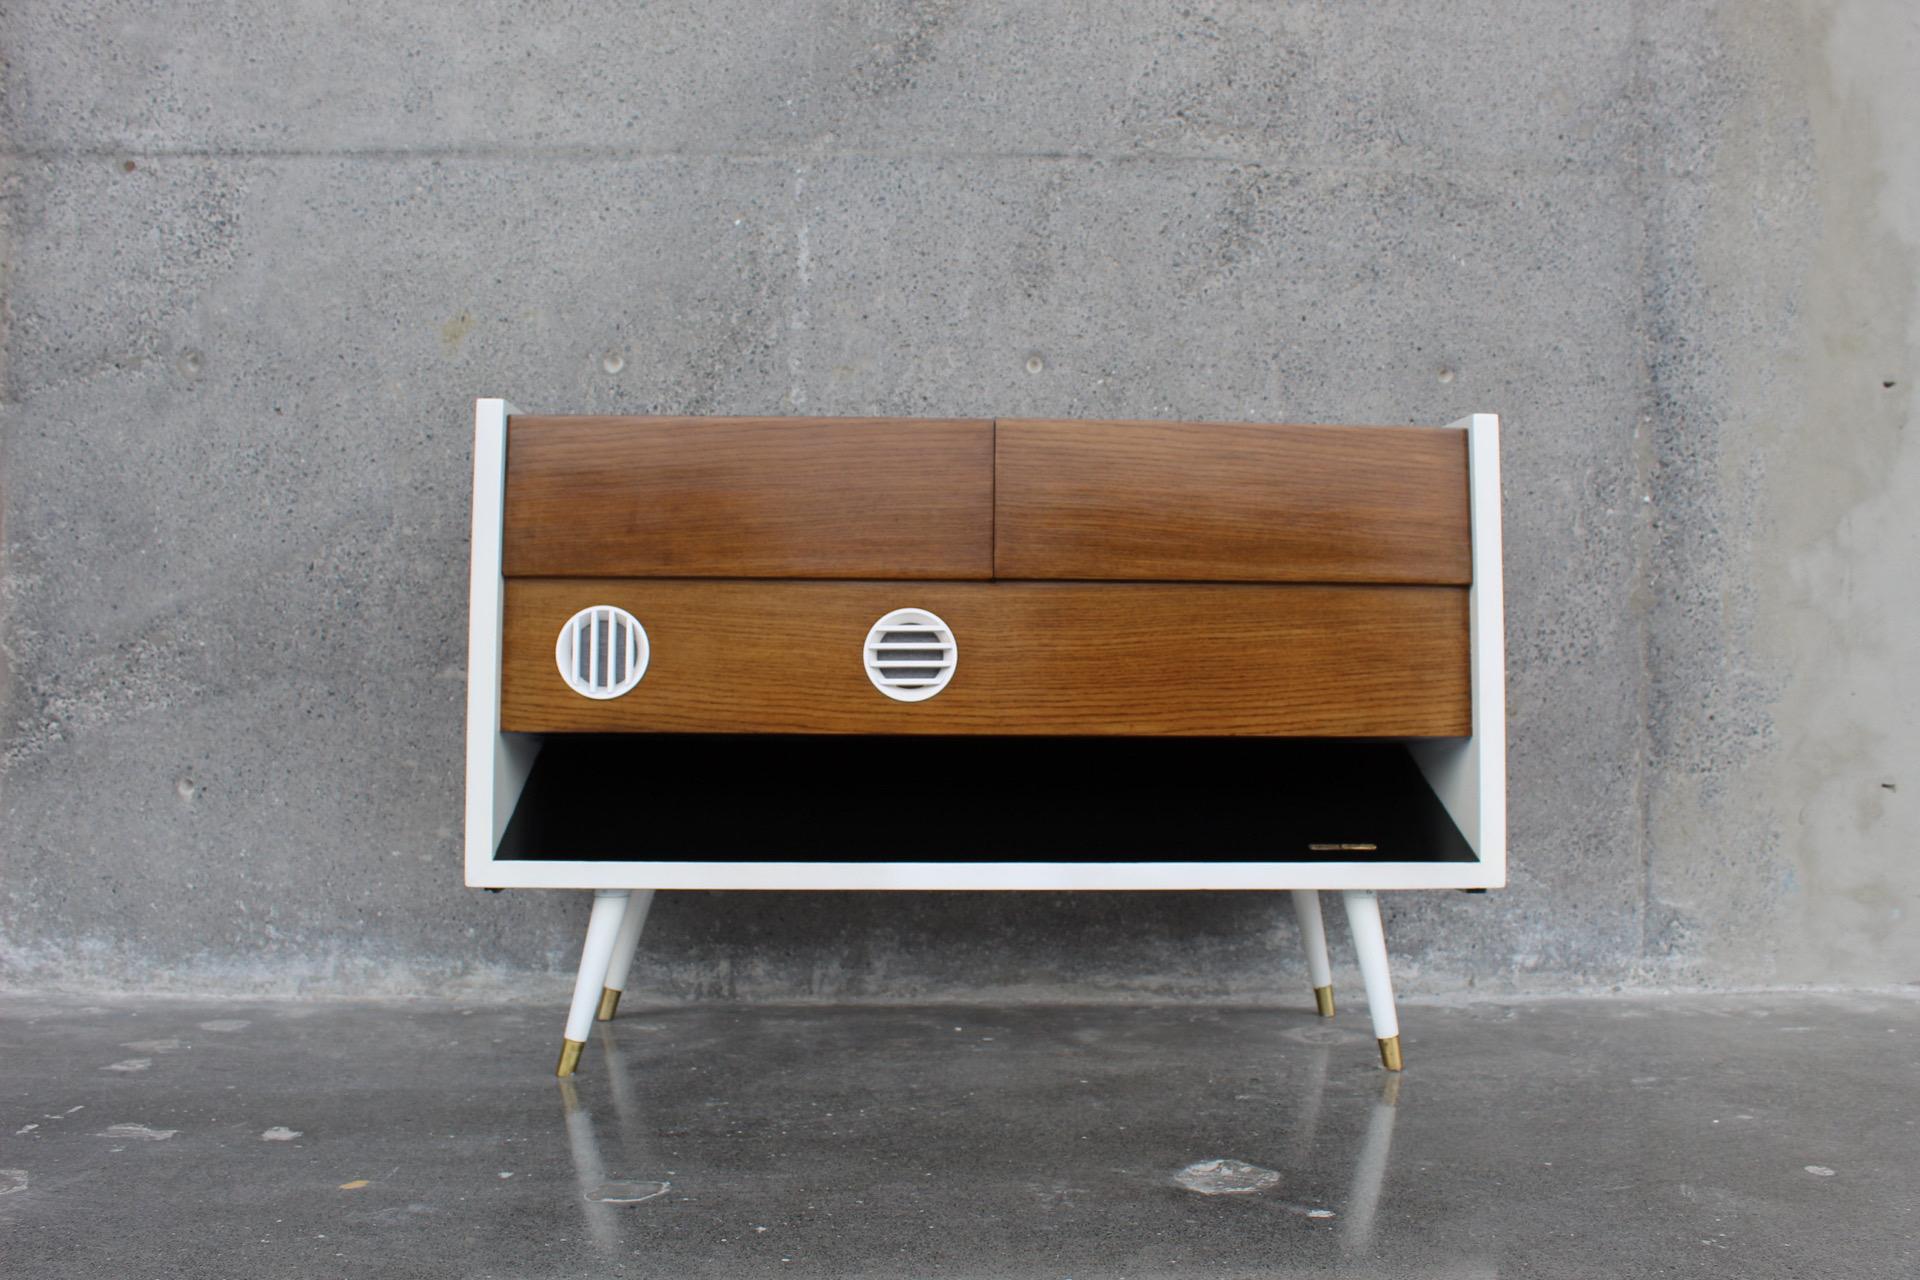 Spectacular mid-century console made in Germany model 8080/USA. We added new Bluetooth audio equipment as the original system we believe does not work. The entire exterior and interior was professionally restored.